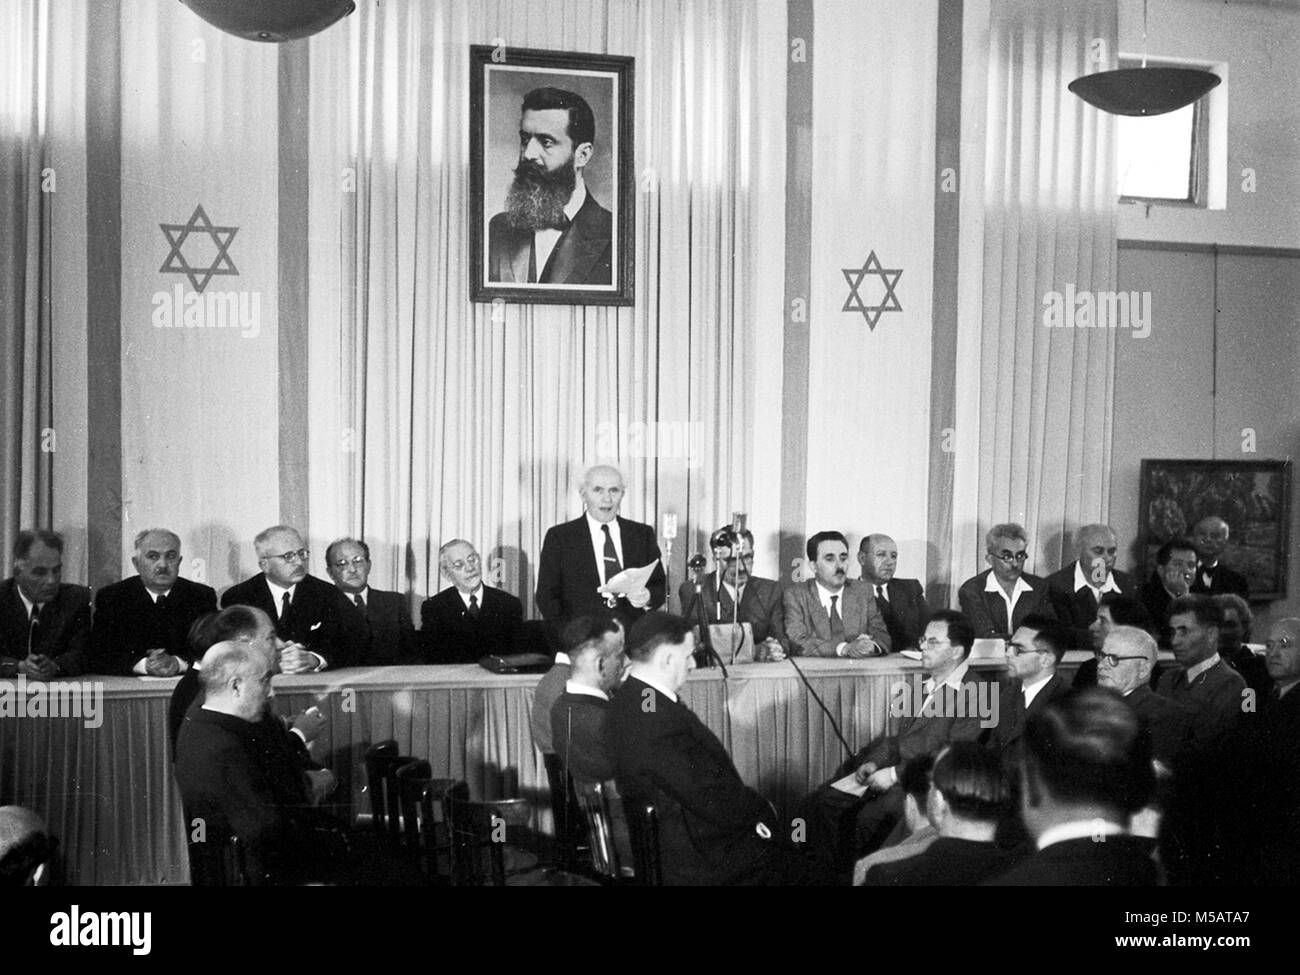 David Ben-Gurion (First Prime Minister of Israel) publicly pronouncing the Declaration of the State of Israel, May 14 1948, Israel Stock Photo